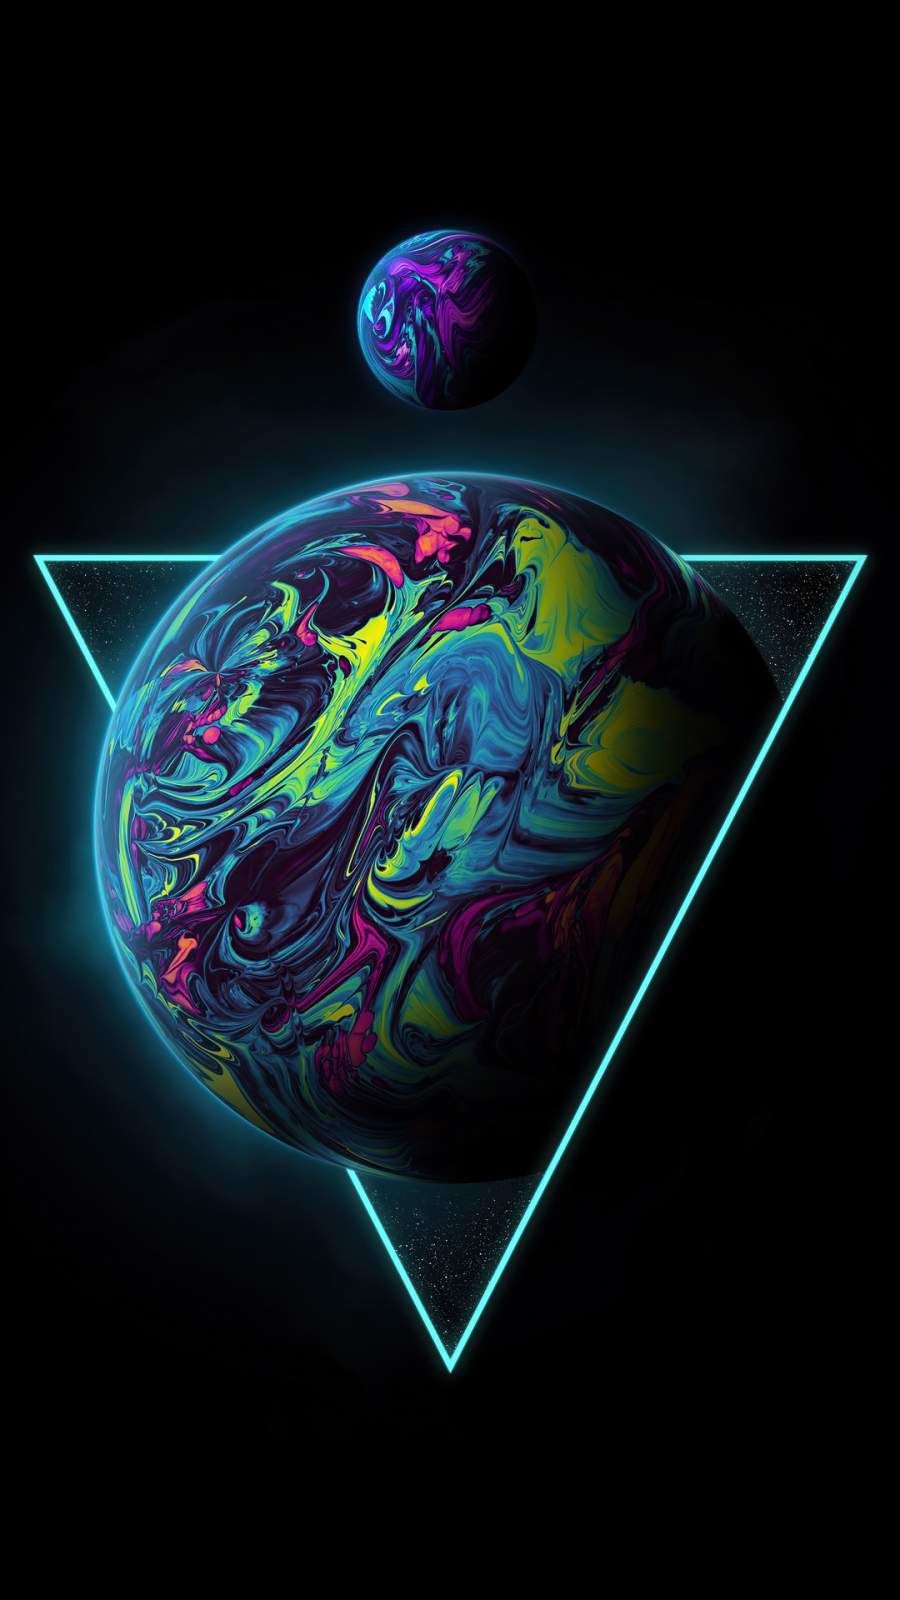 iPhone Wallpaper for iPhone iPhone iPhone X, iPhone XR, iPhone 8 Plus High Qualit. Space iphone wallpaper, 4k wallpaper iphone, Graffiti wallpaper iphone